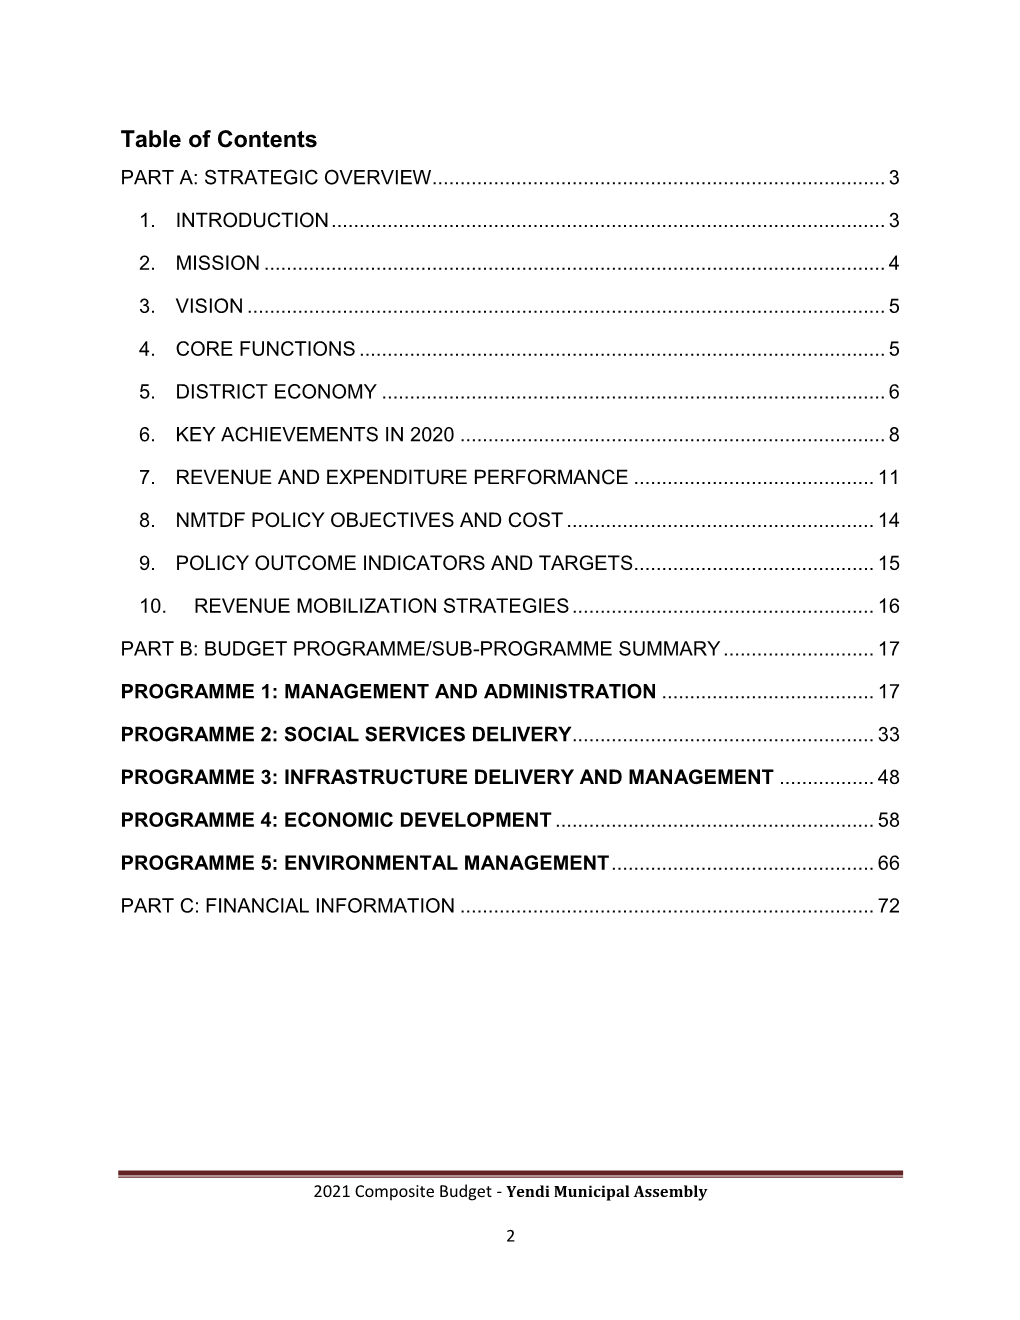 Table of Contents PART A: STRATEGIC OVERVIEW